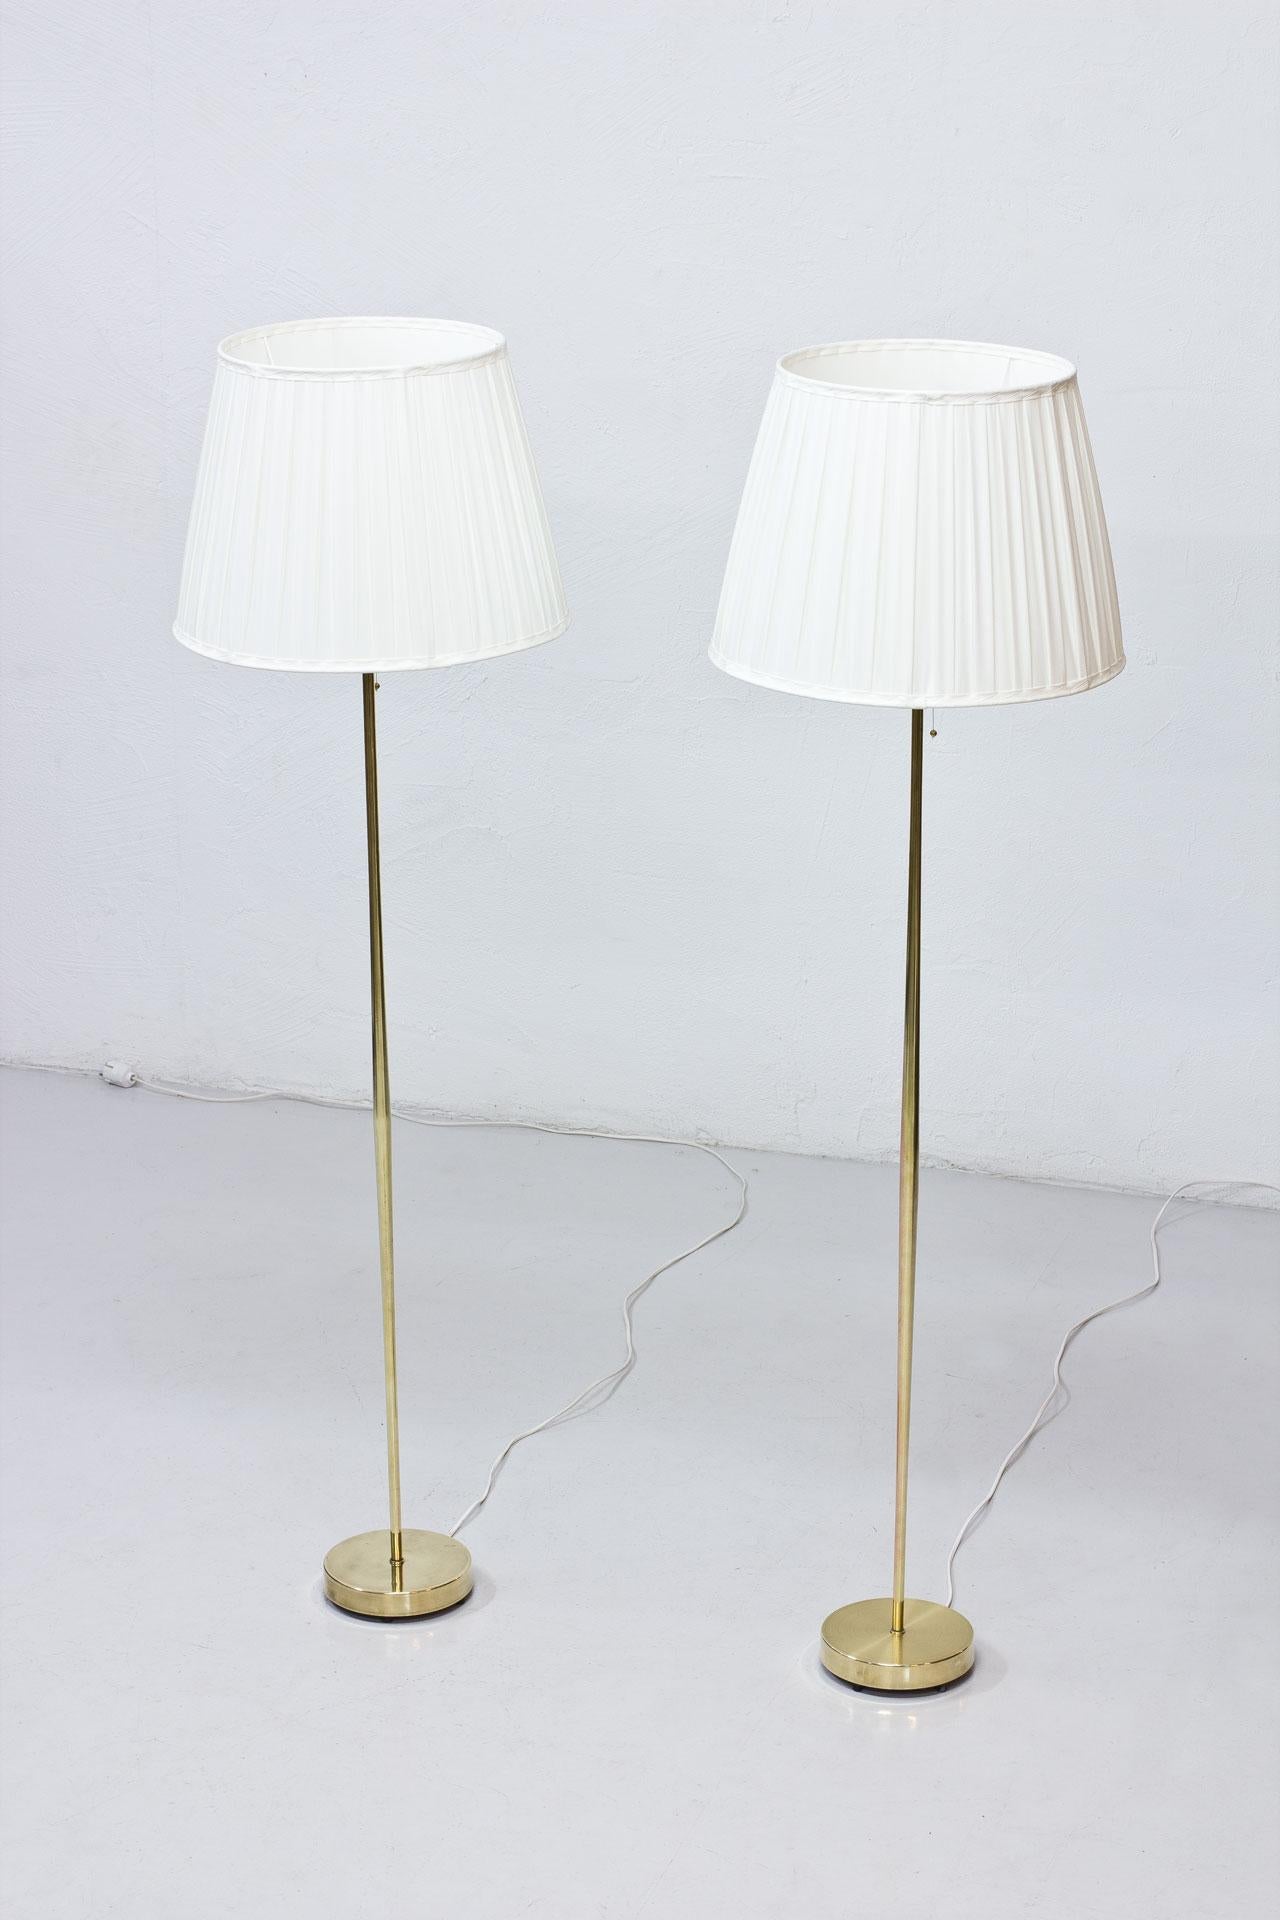 Pair of floor lamps manufactured by Falkenbergs Belysning in Sweden during the 1950s. 
Polished brass stem. 
Lamp shades reupholstered in a box pleated off-white chintz fabric. 
Rewired. Light switch on the brass fittings. Signed on the bottom.